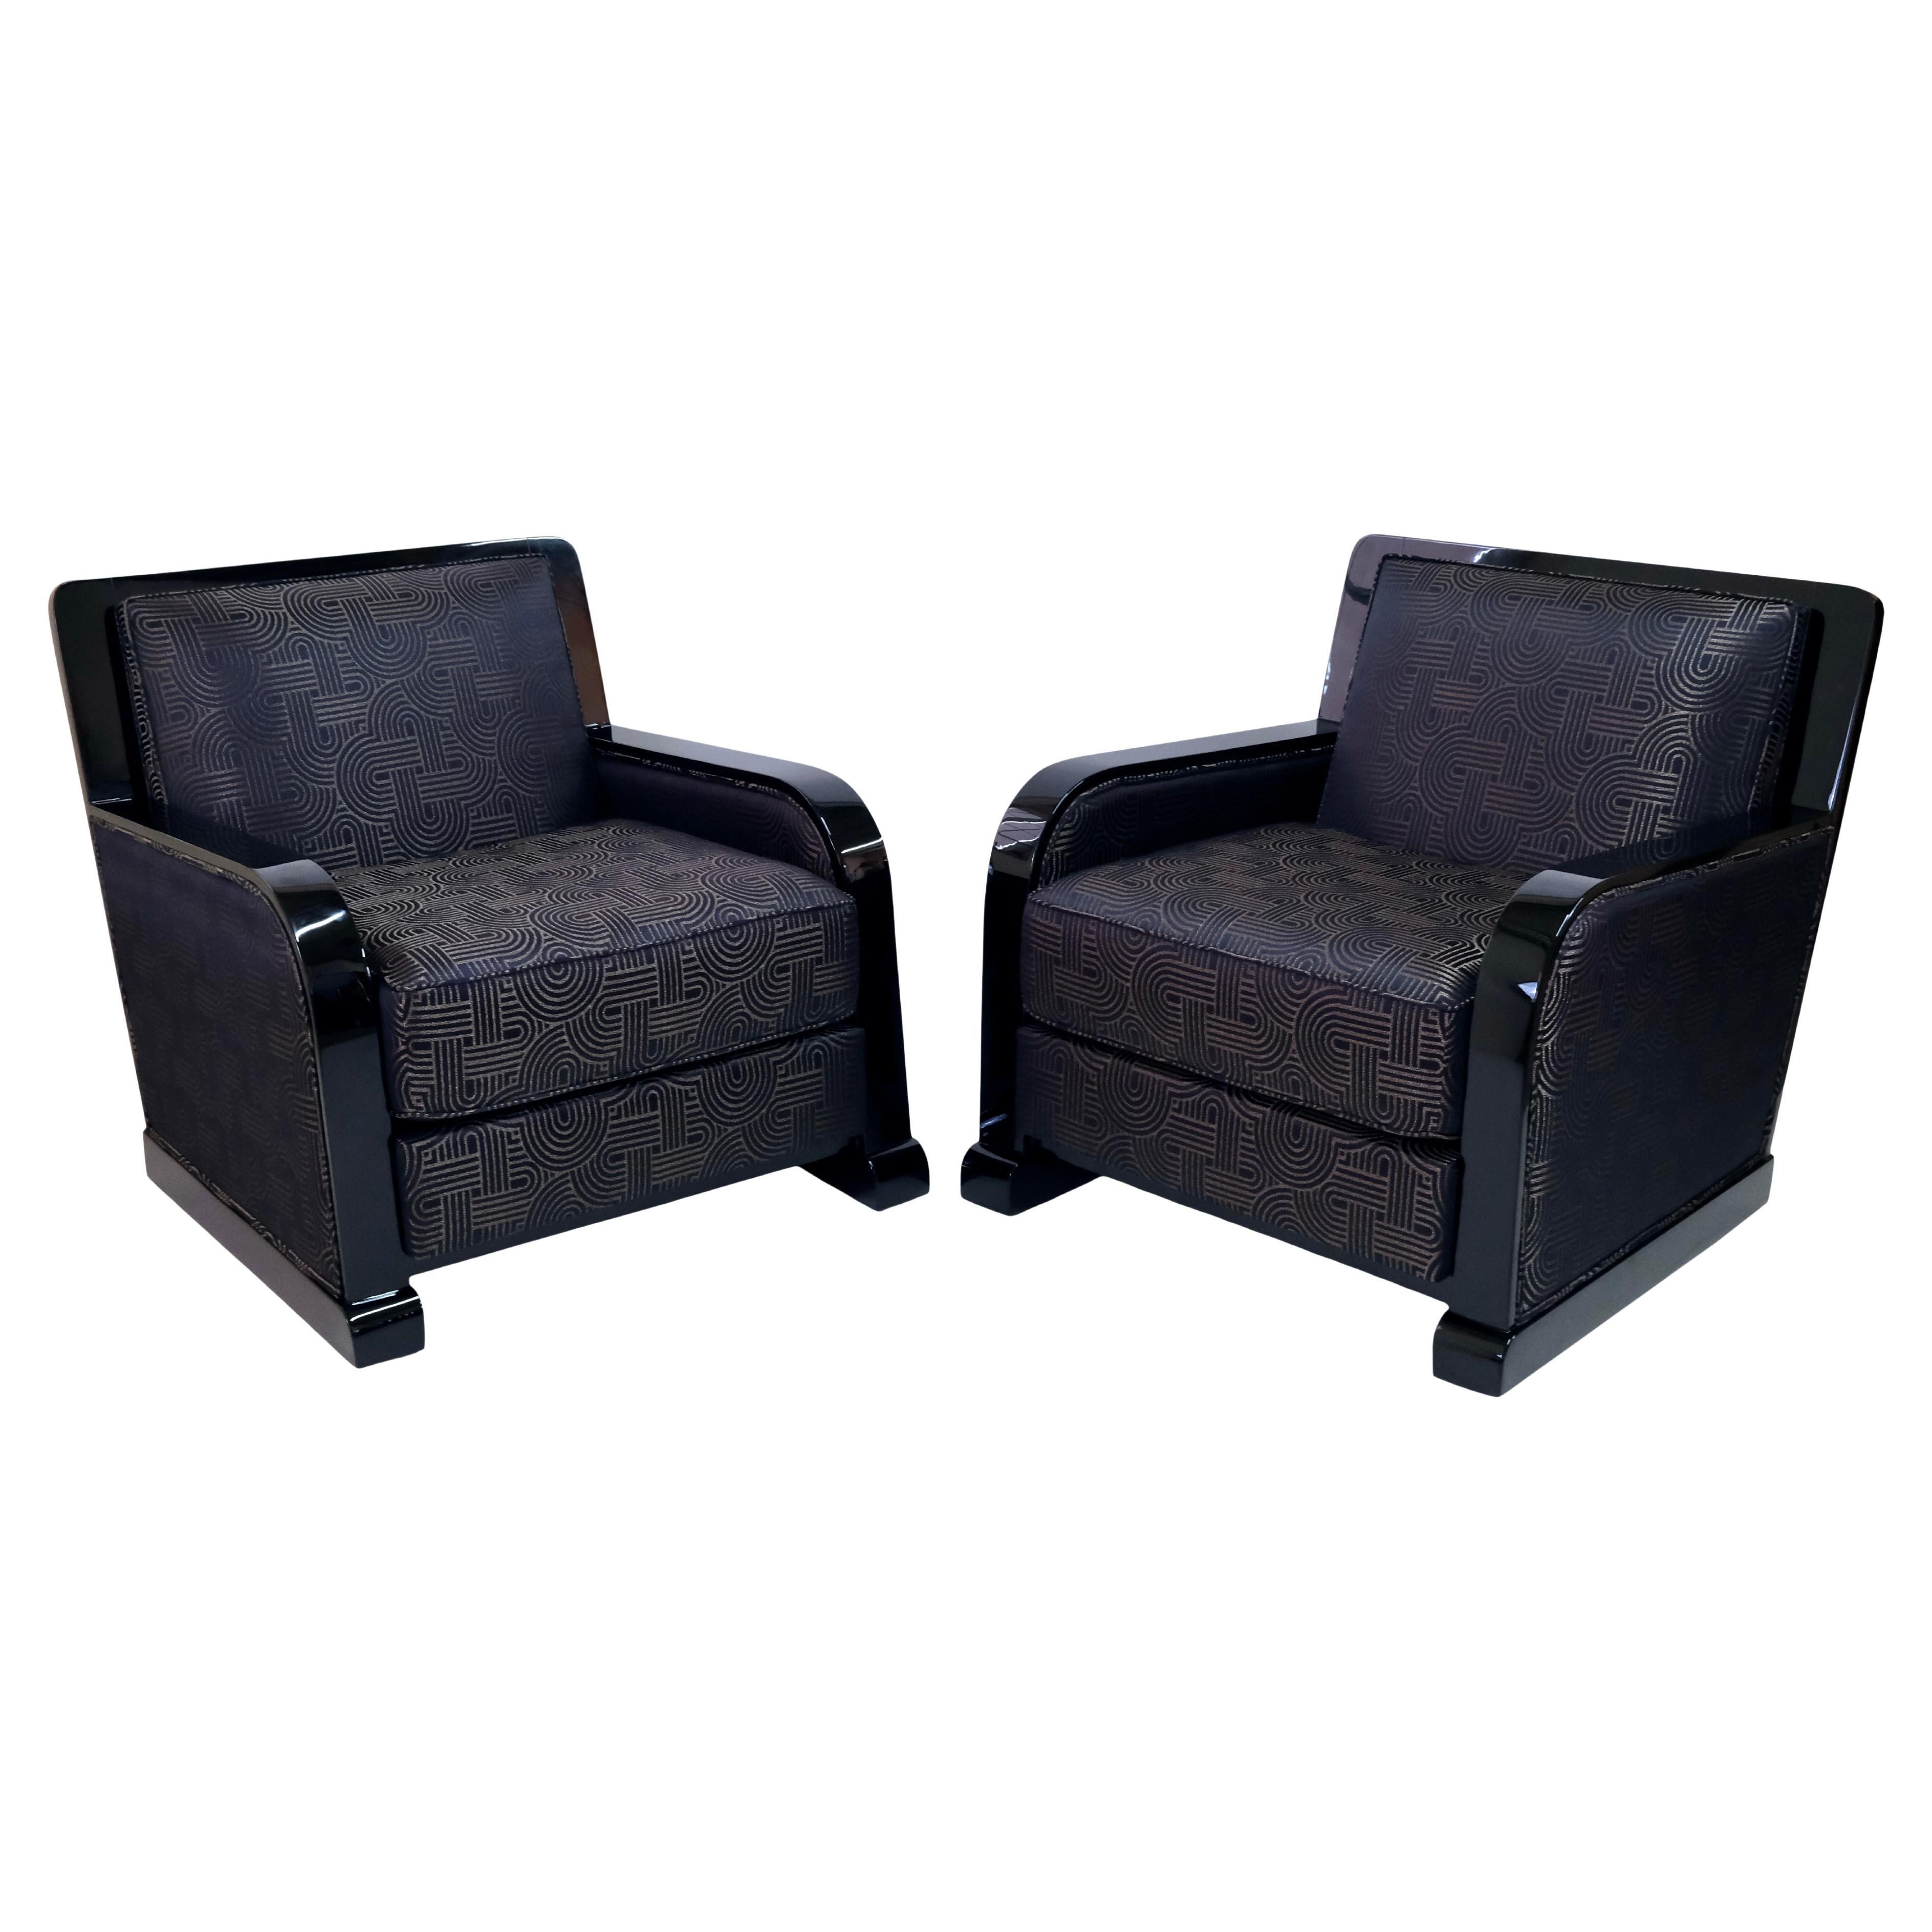 Set of 2 French Art Deco Club Chairs in Black Lacquer with Art Deco Pattern